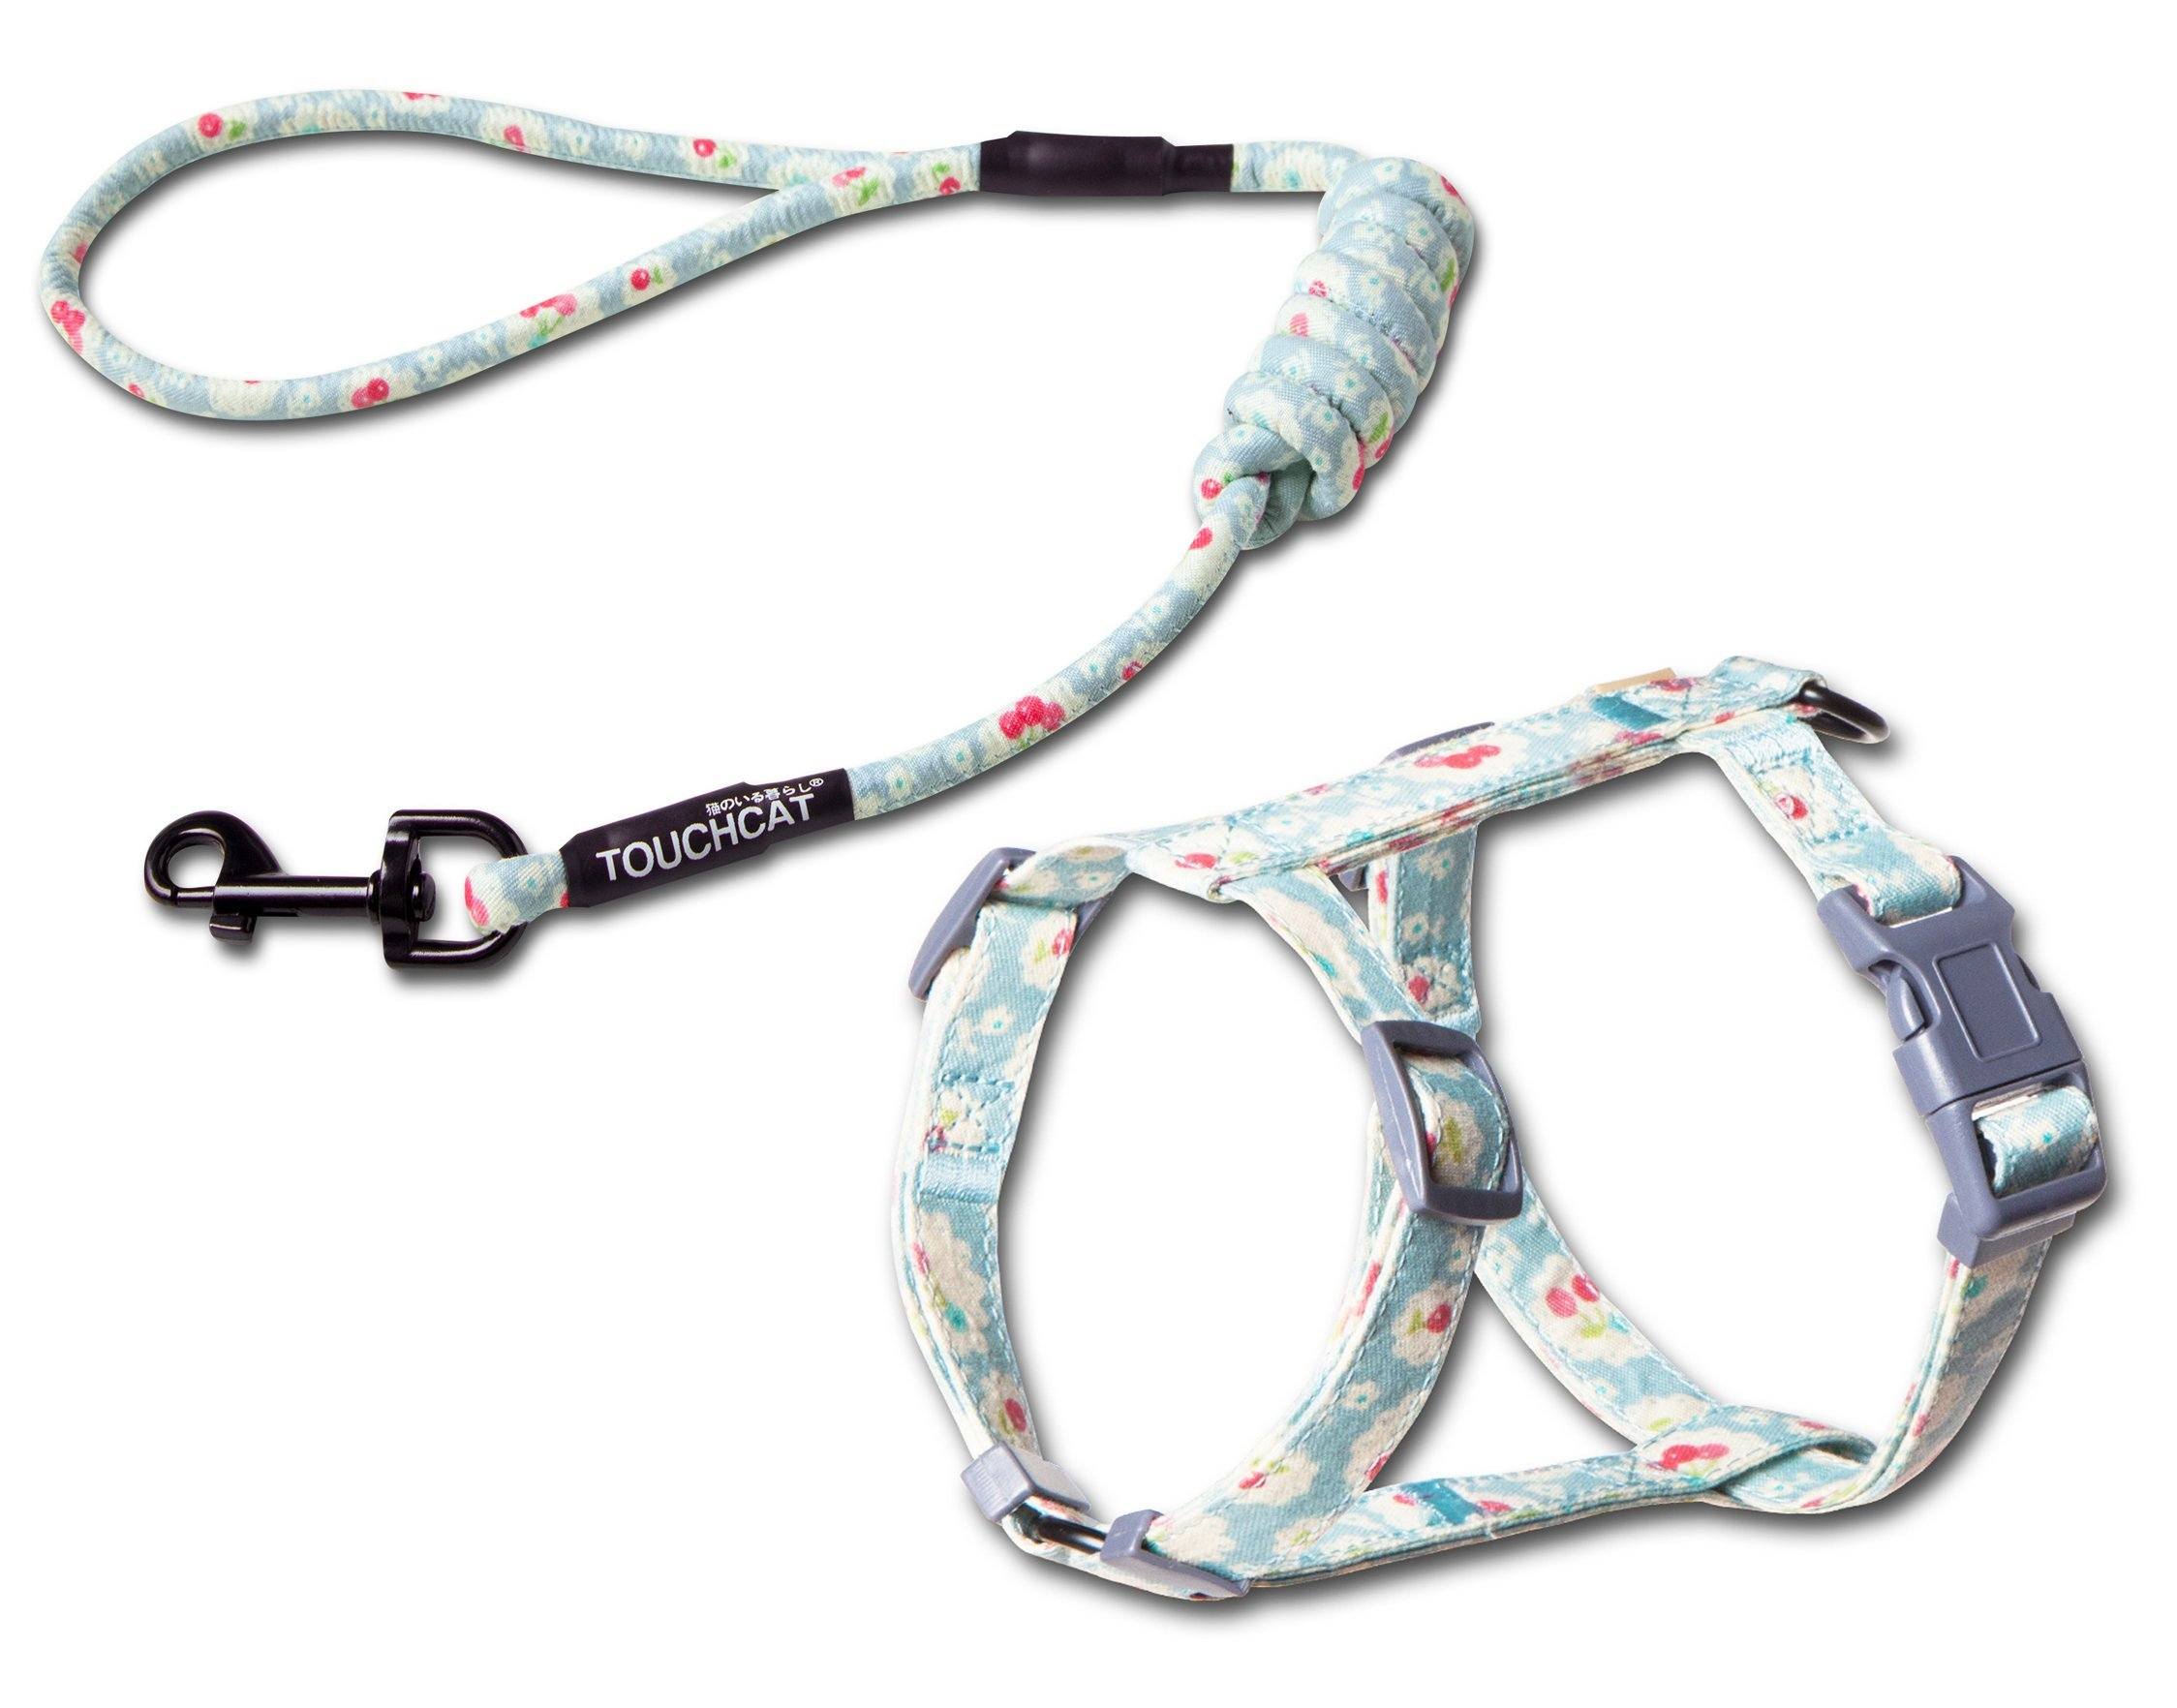 Touchcat 'Radi-Claw' Durable Cable Cat Harness and Leash Combo Small Sky Blue